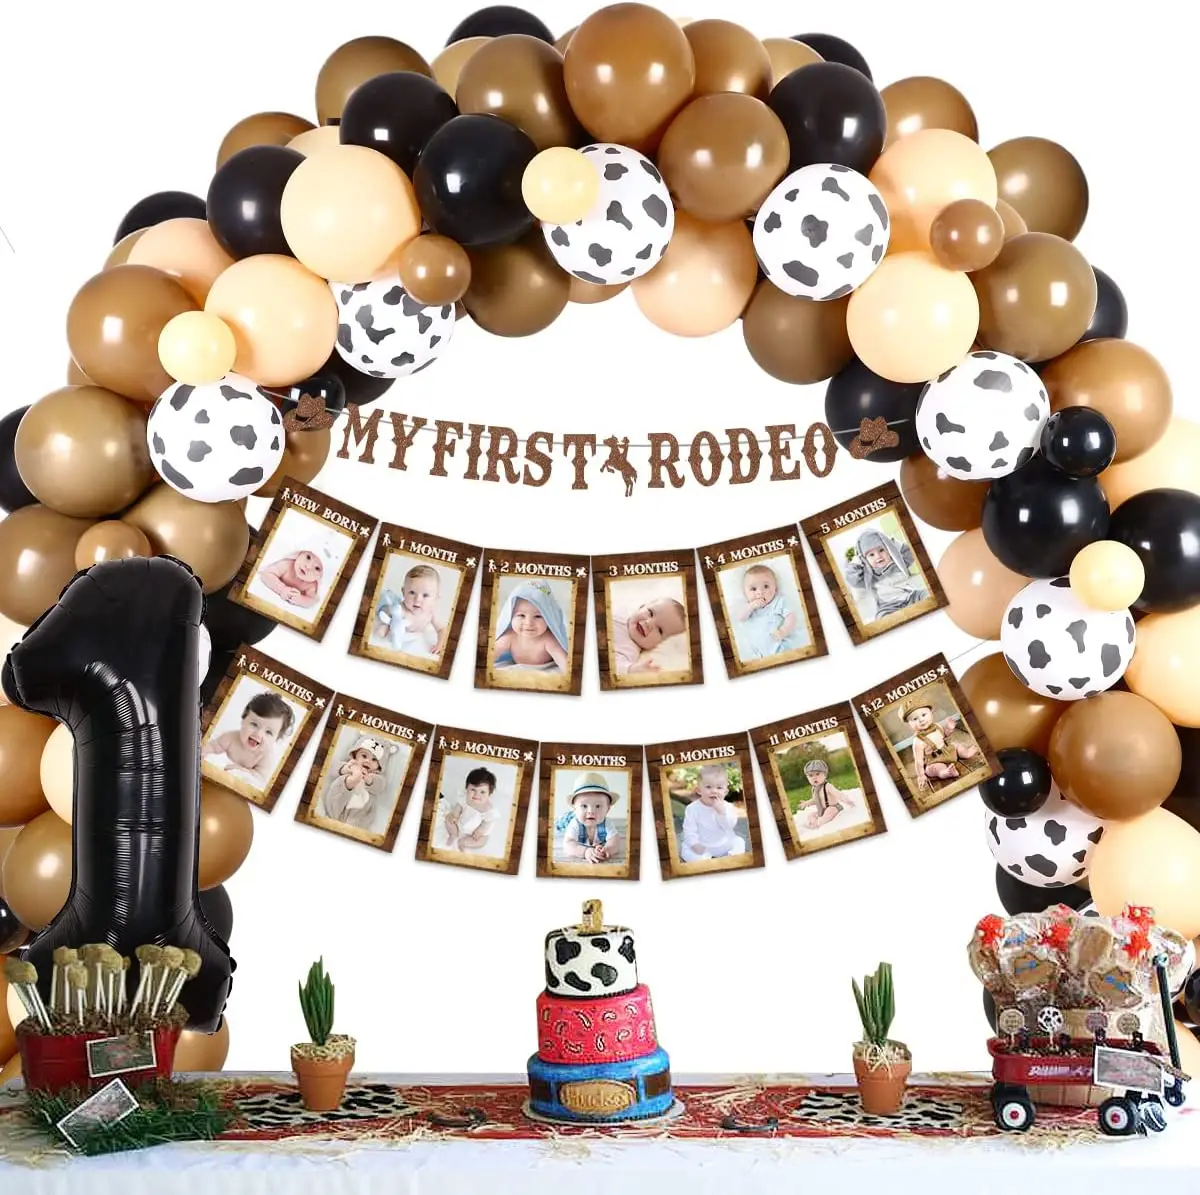 

Cheereveal First Rodeo Western Cowboy Theme 1st Birthday Party Decorations for Boys Brown Balloon Garland My First Rodeo Banner